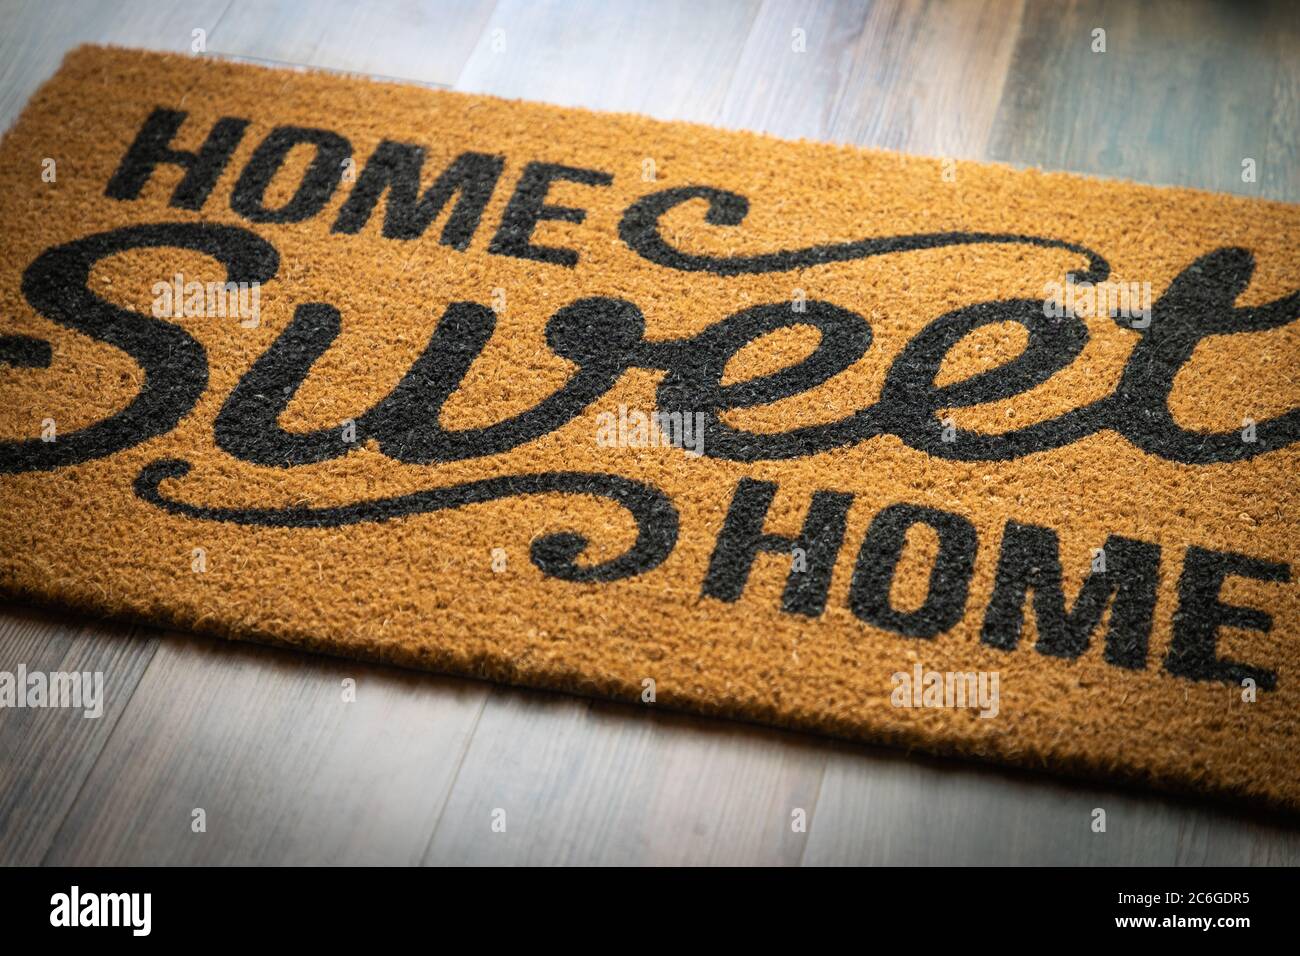 Home Sweet Home Welcome Mat Resting on Floor. Stock Photo